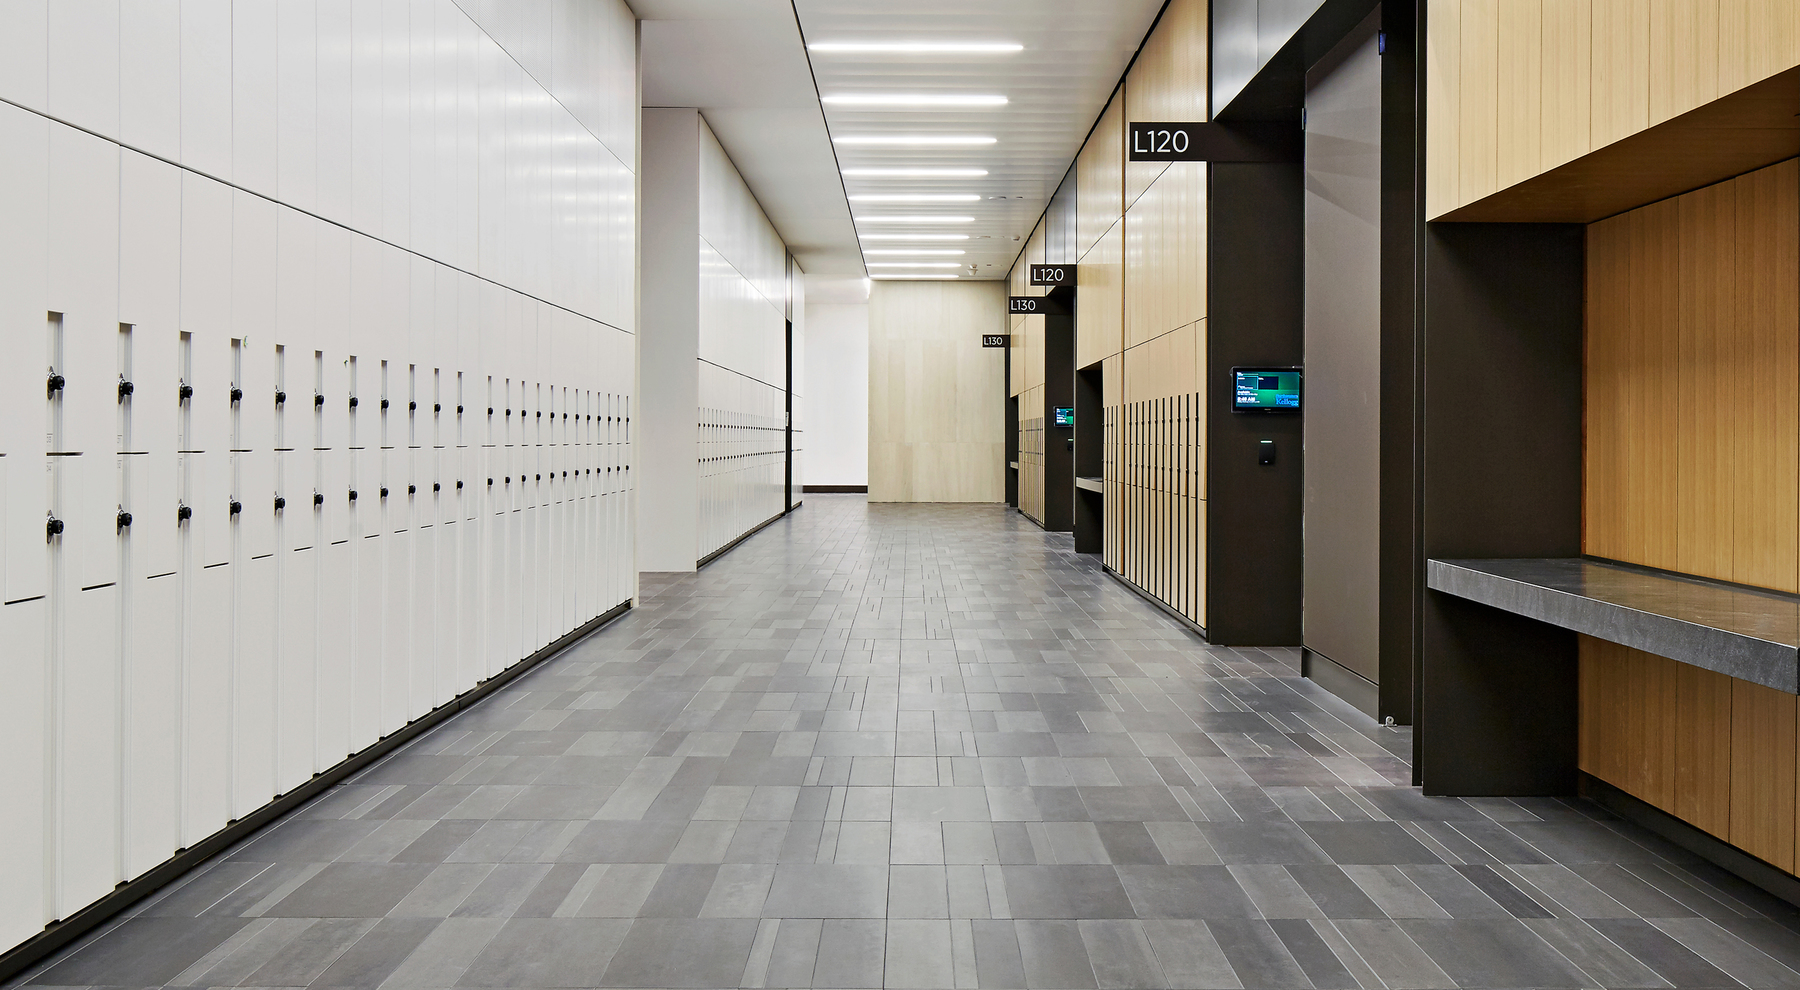 About Tate Kingspan Canada, Tate Floor Tiles